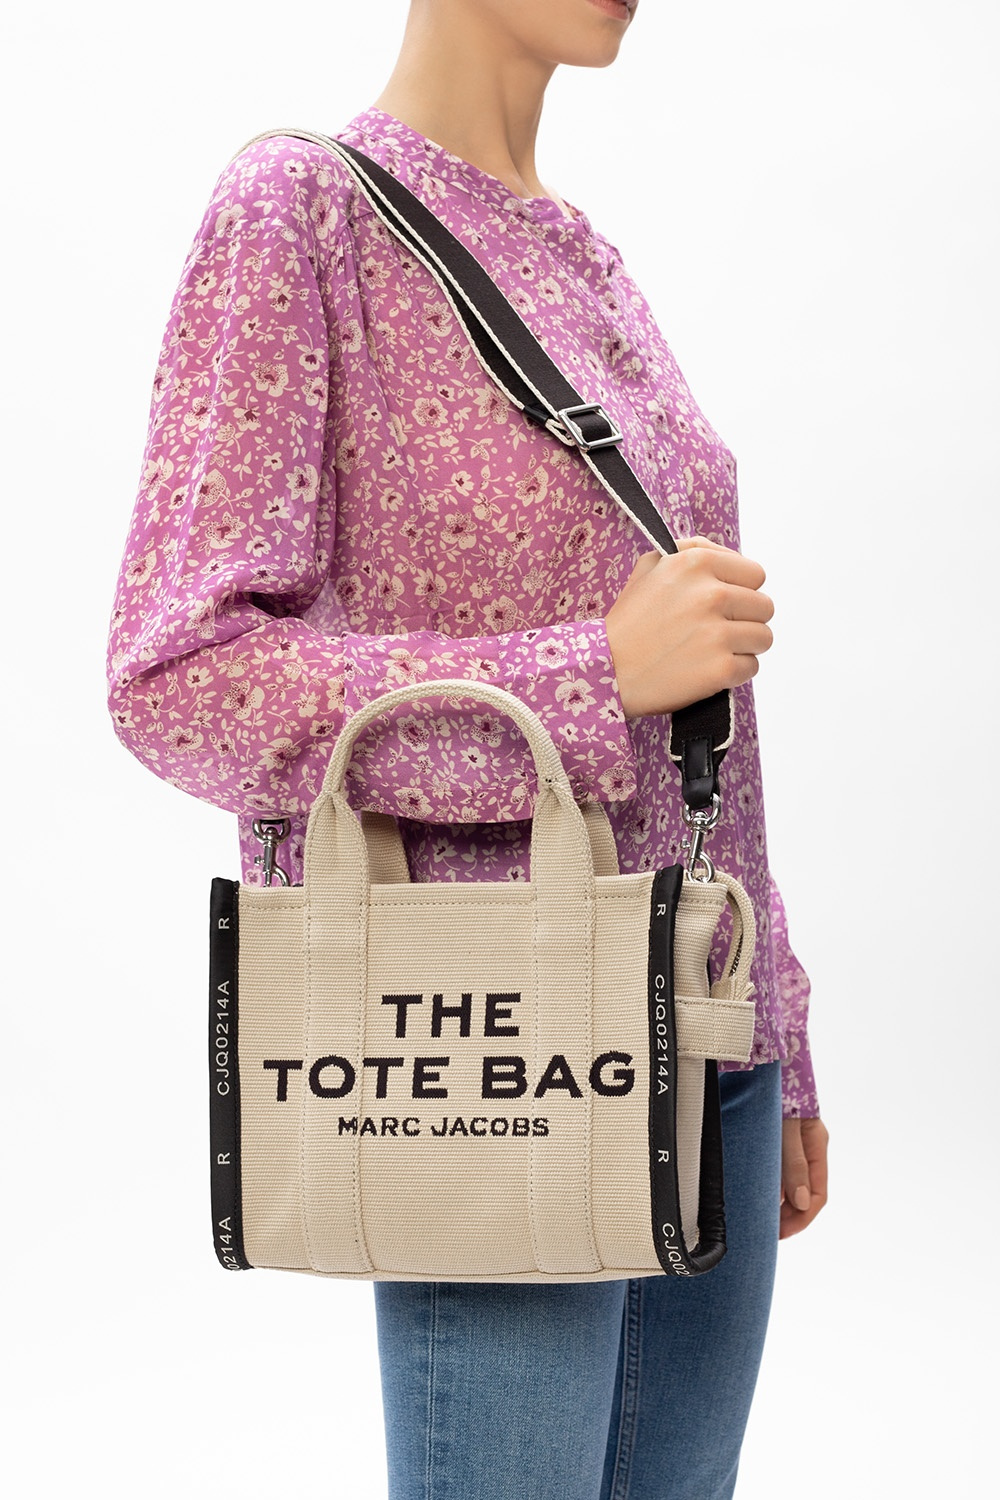 Marc Jacobs (The) Shopper bag with logo